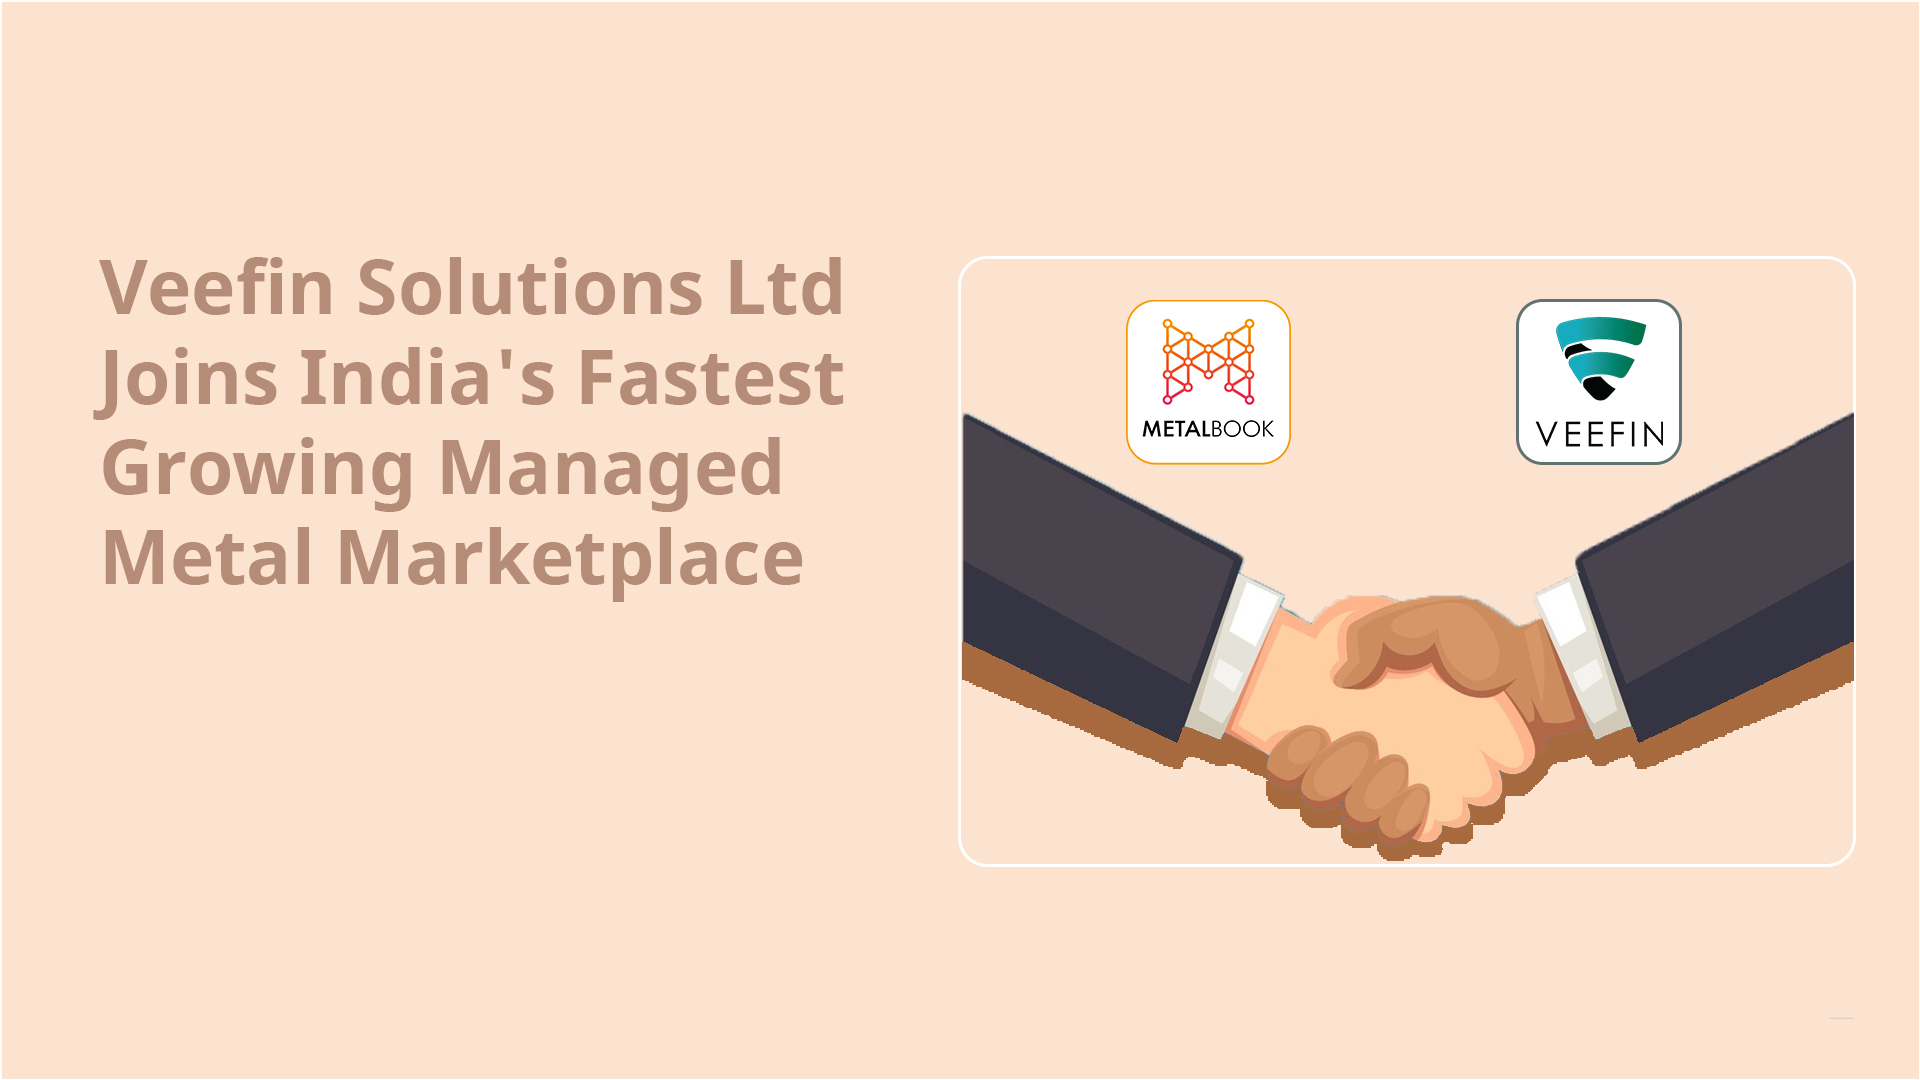 Metalbook Accelerates Growth: Veefin Solutions Ltd Joins India's Fastest Growing Managed Metal Marketplace